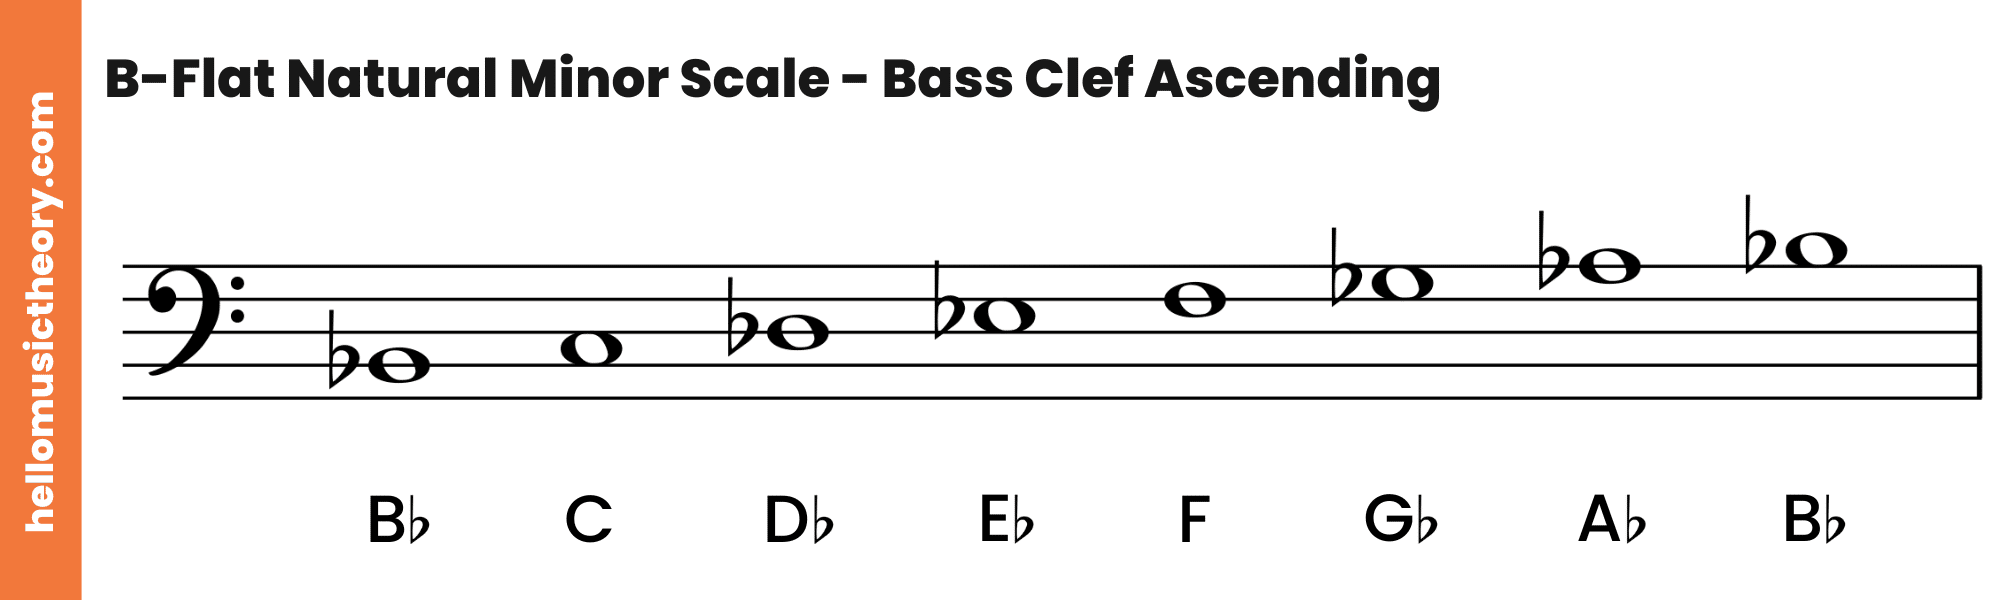 B-Flat Natural Minor Scale Bass Clef Ascending